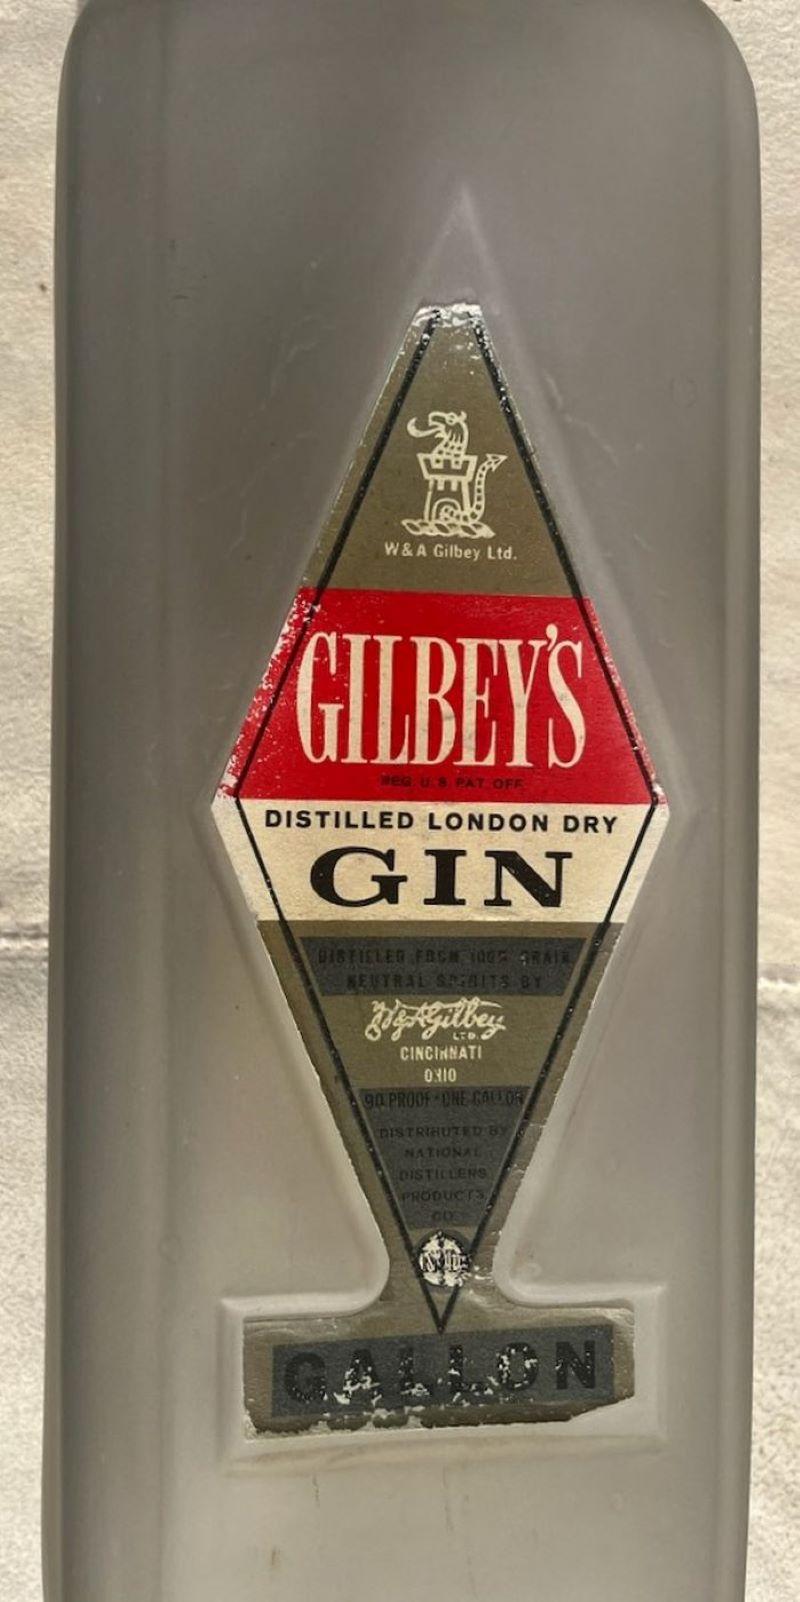 This monumental Gilbey's Gin bottle in a commercial or bar size. It could have also been a bar display.